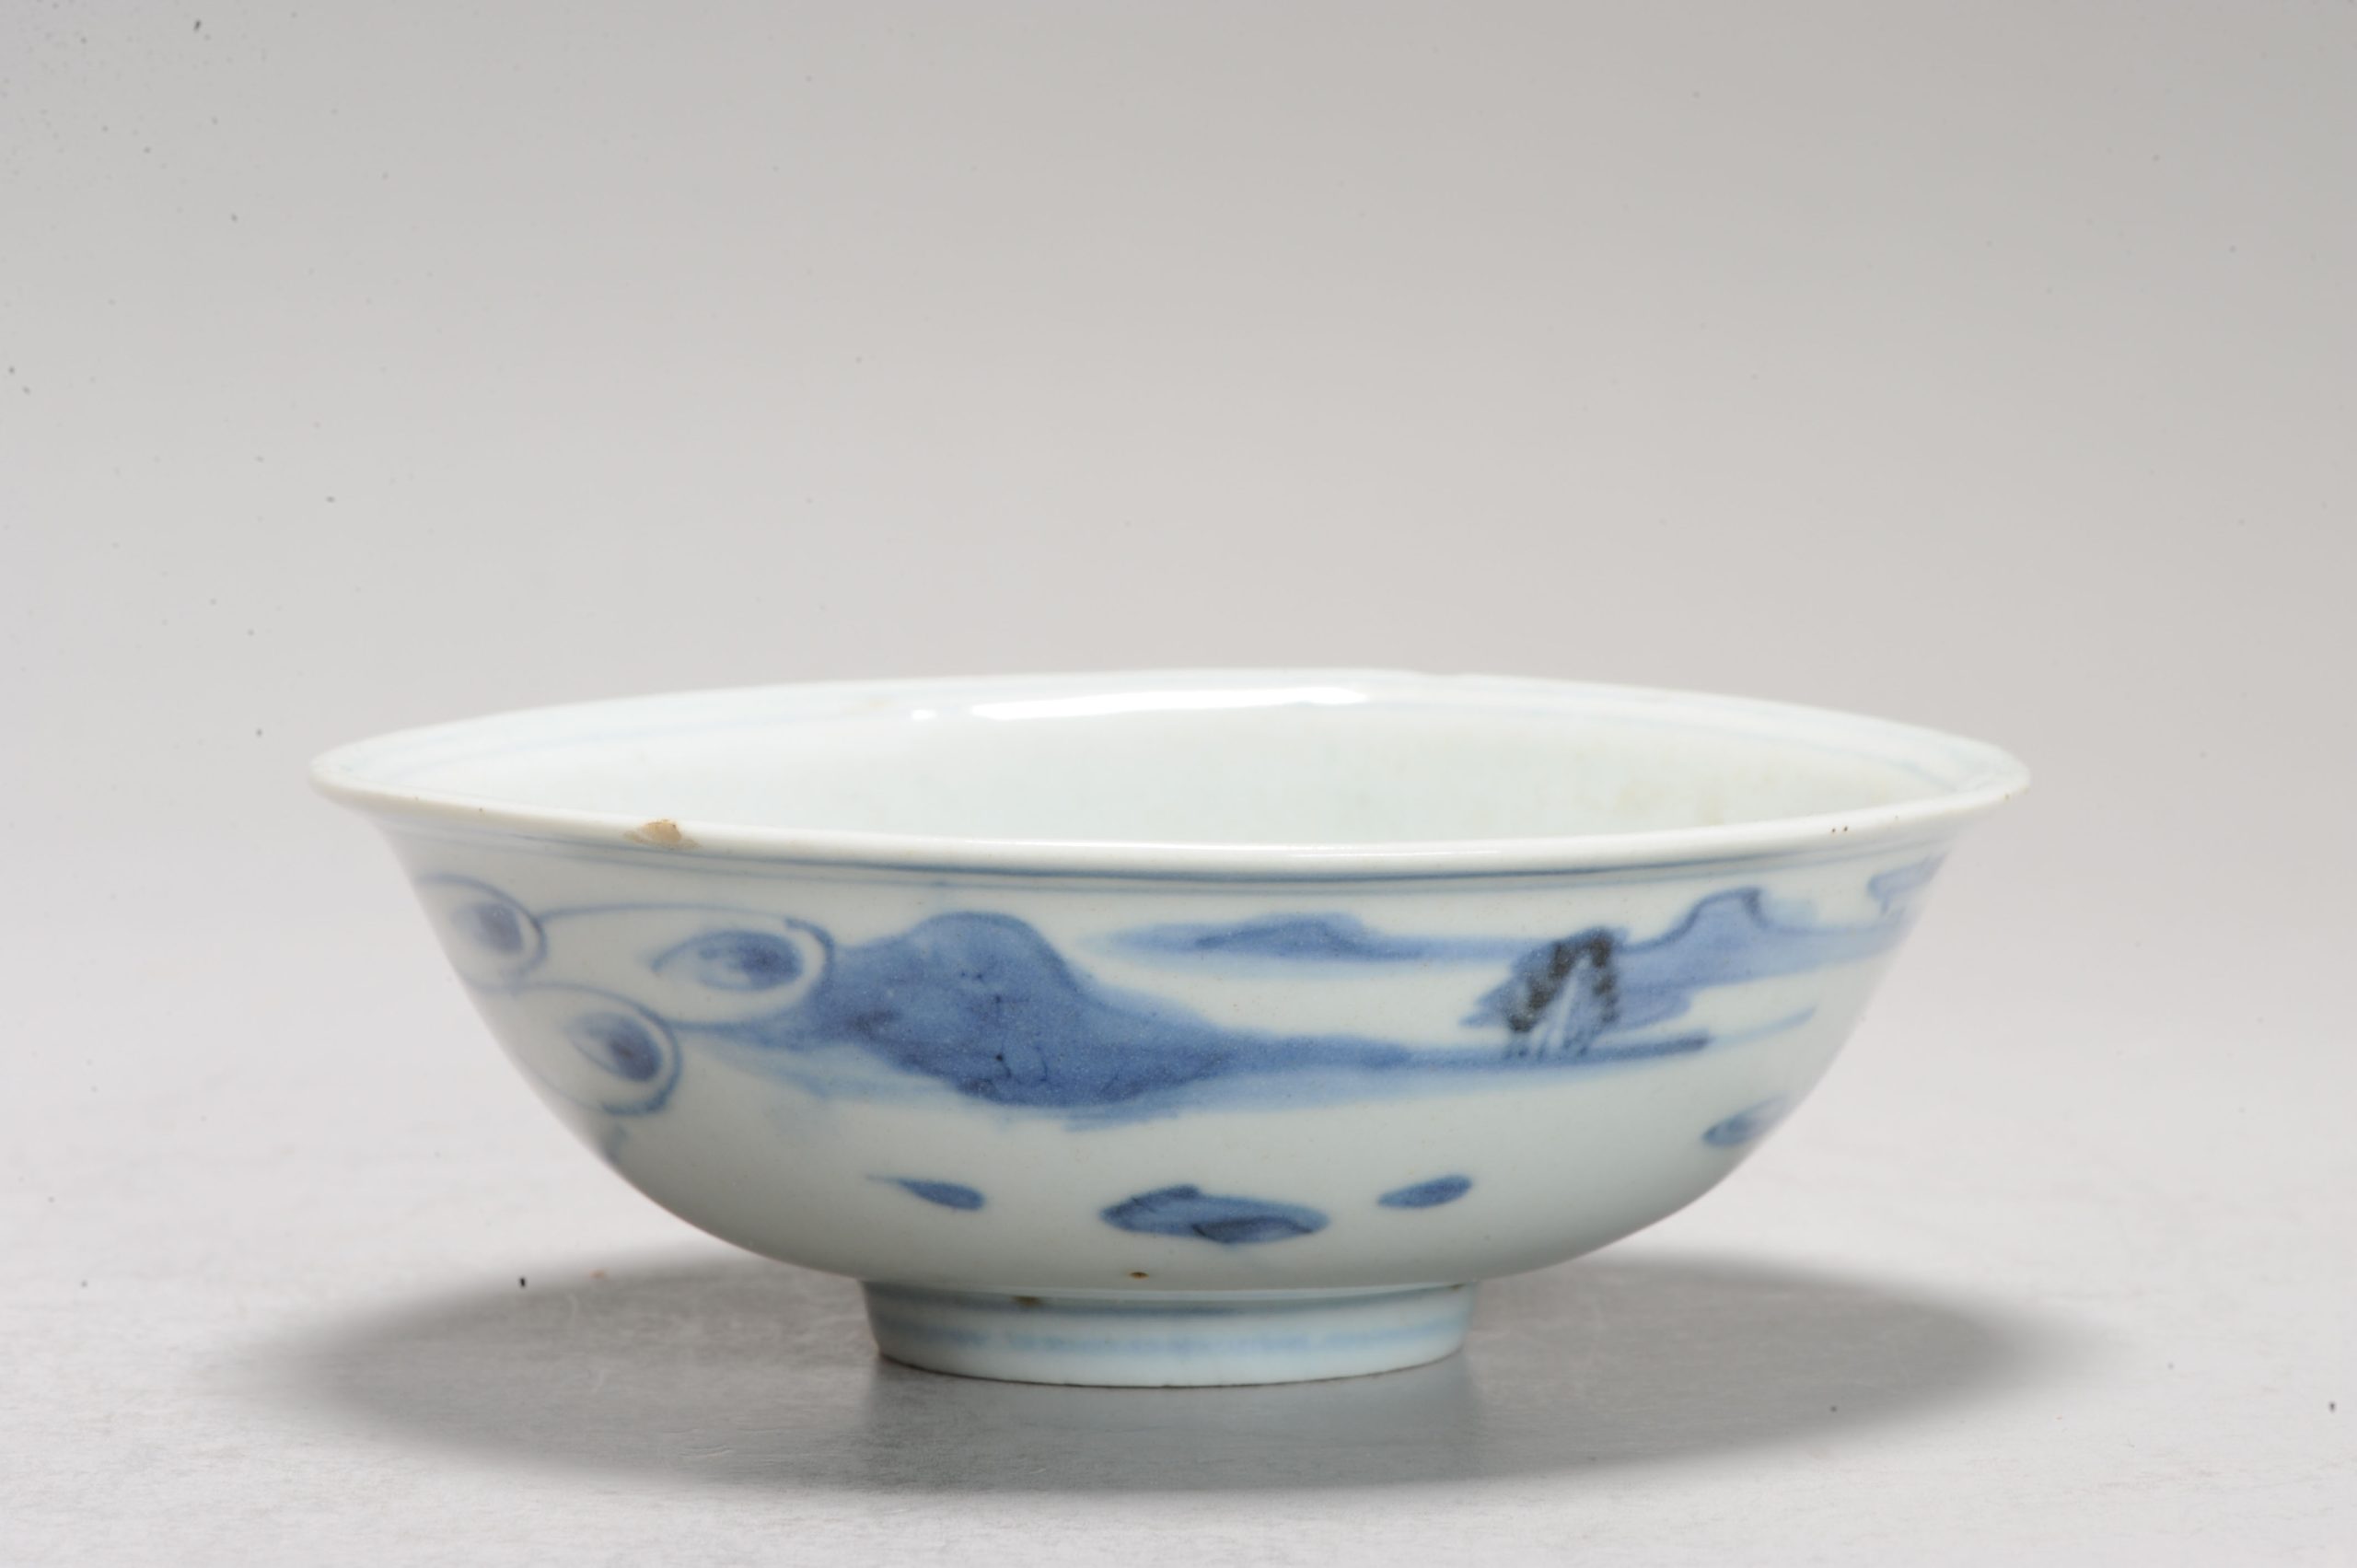 1185 A Chinese porcelain Ming Blue and White bowl with Xieyi Landscape